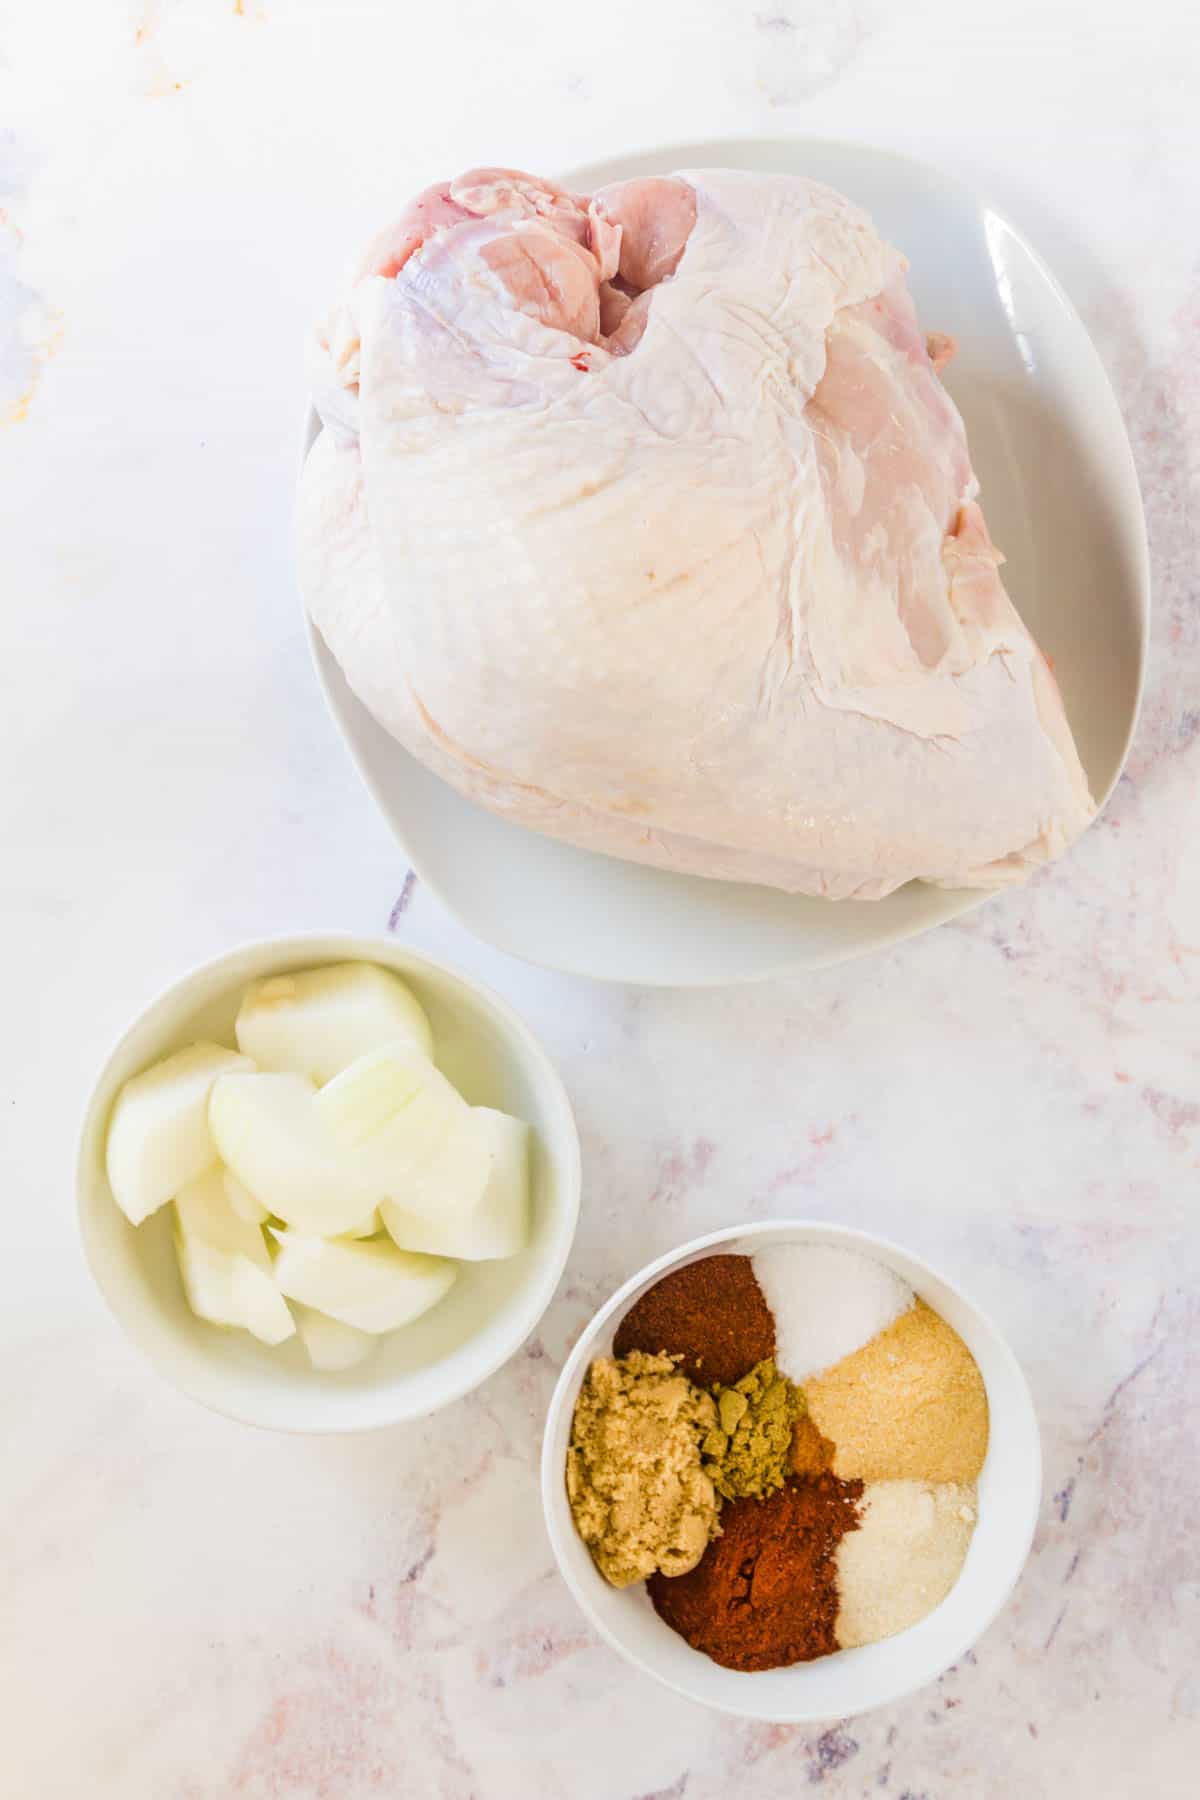 The ingredients for Slow Cooker Turkey Breast set out on the counter.